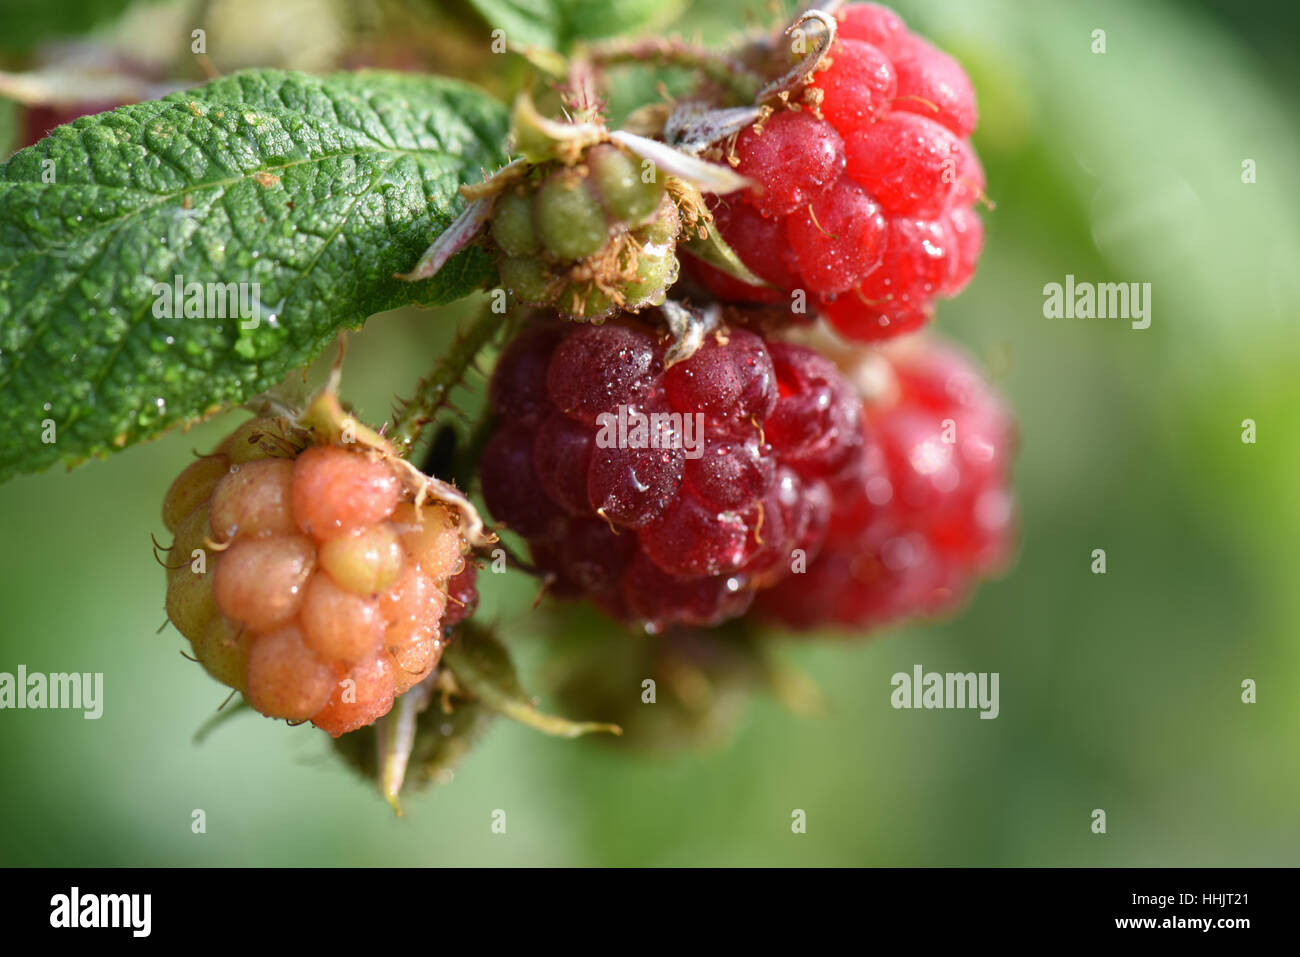 Raspberries fruit stages hi-res stock photography - Alamy and images